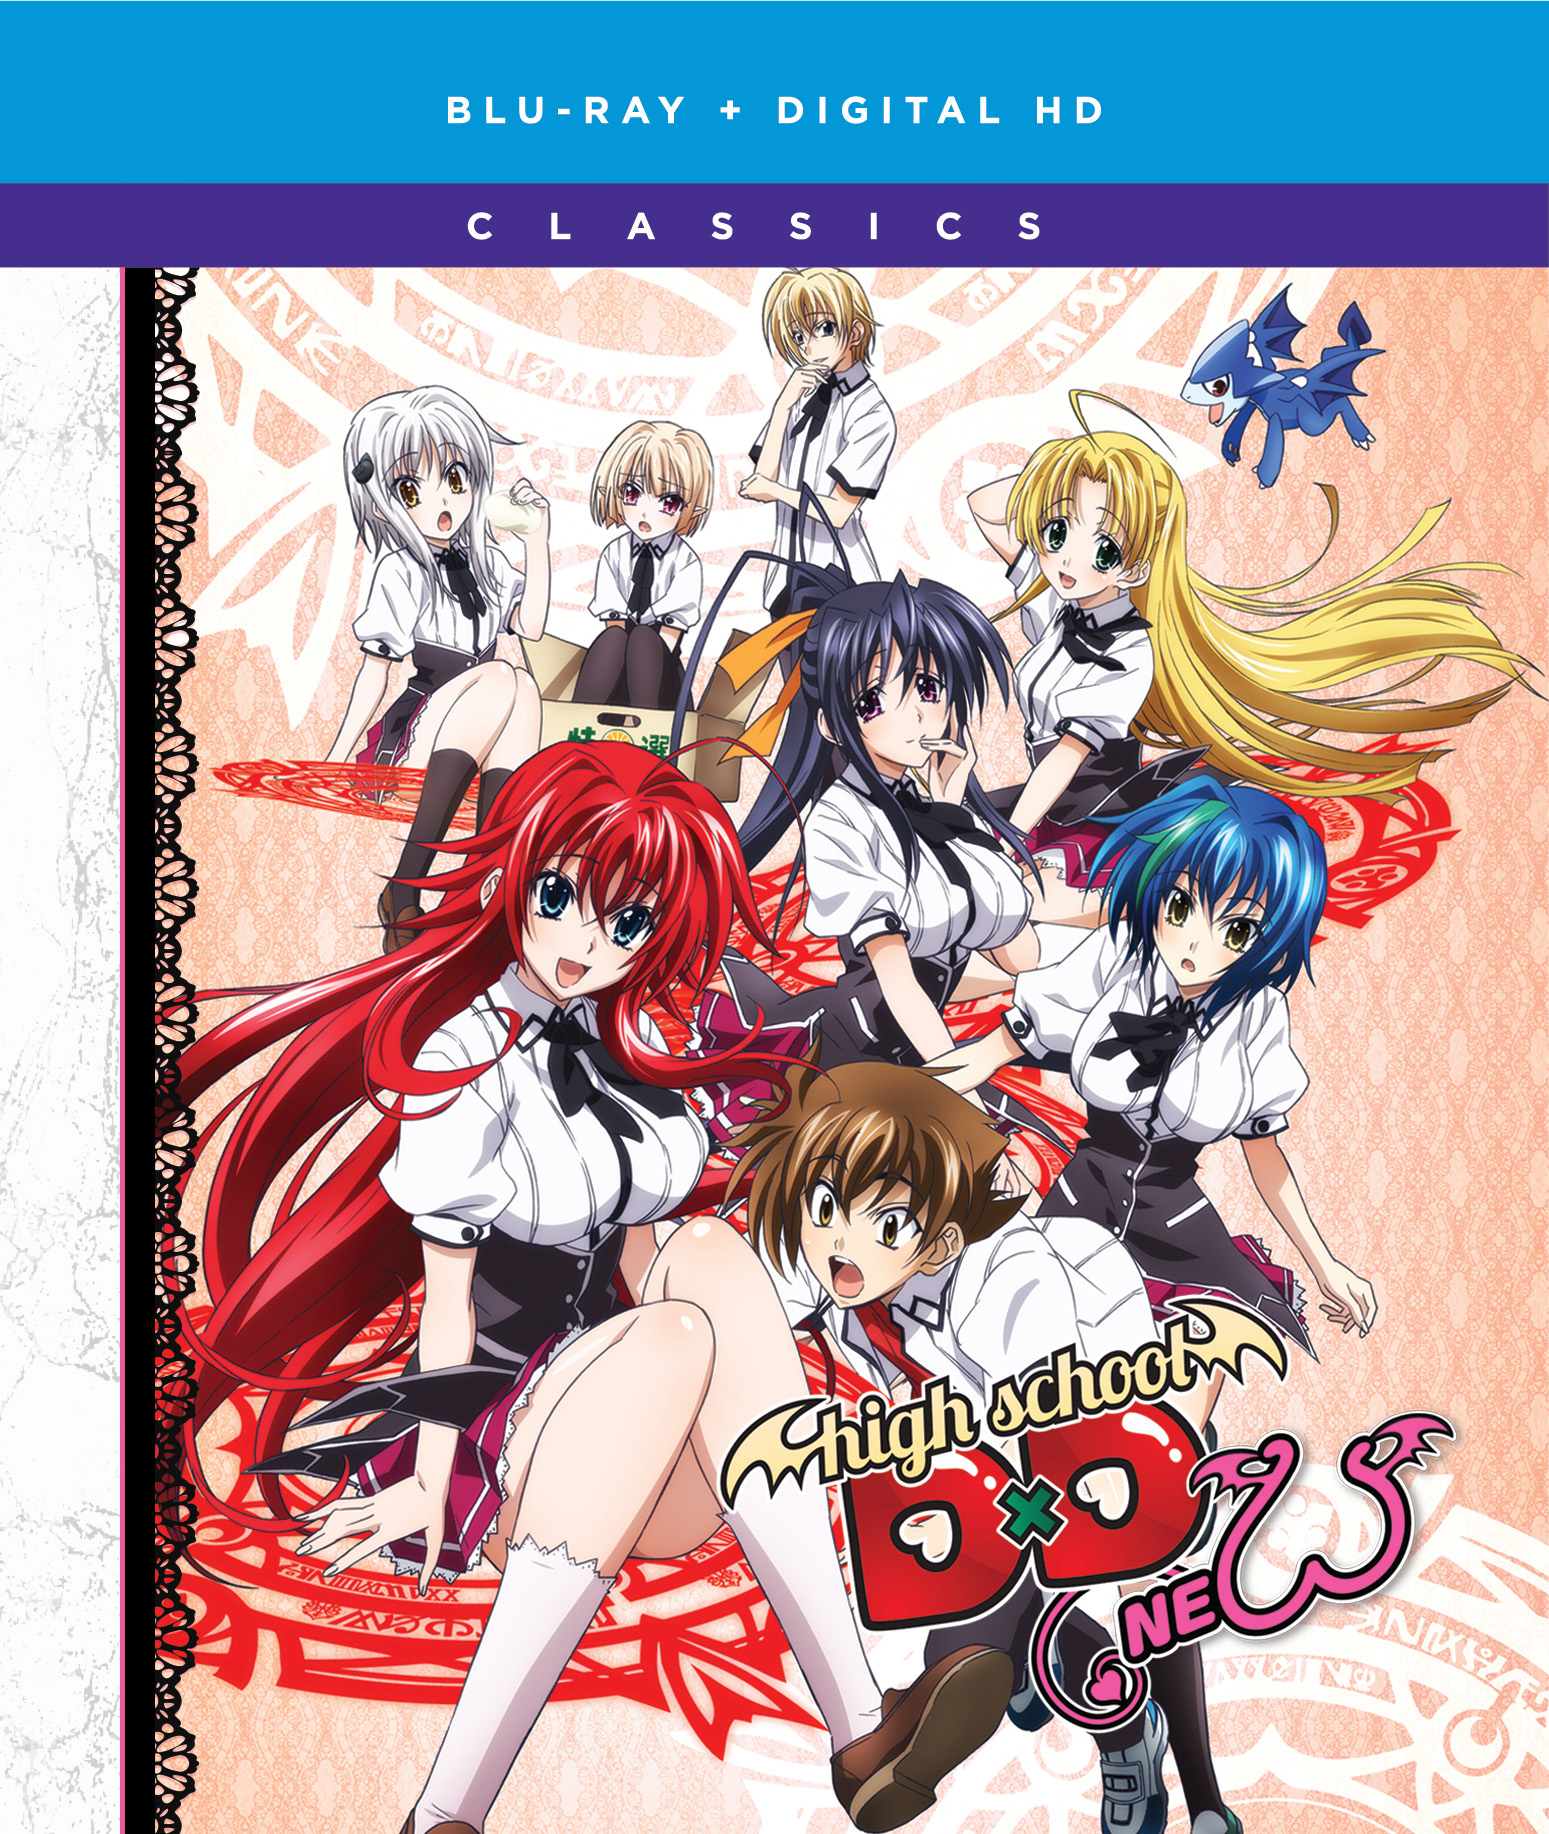 High School DxD Anime Review (Part One)